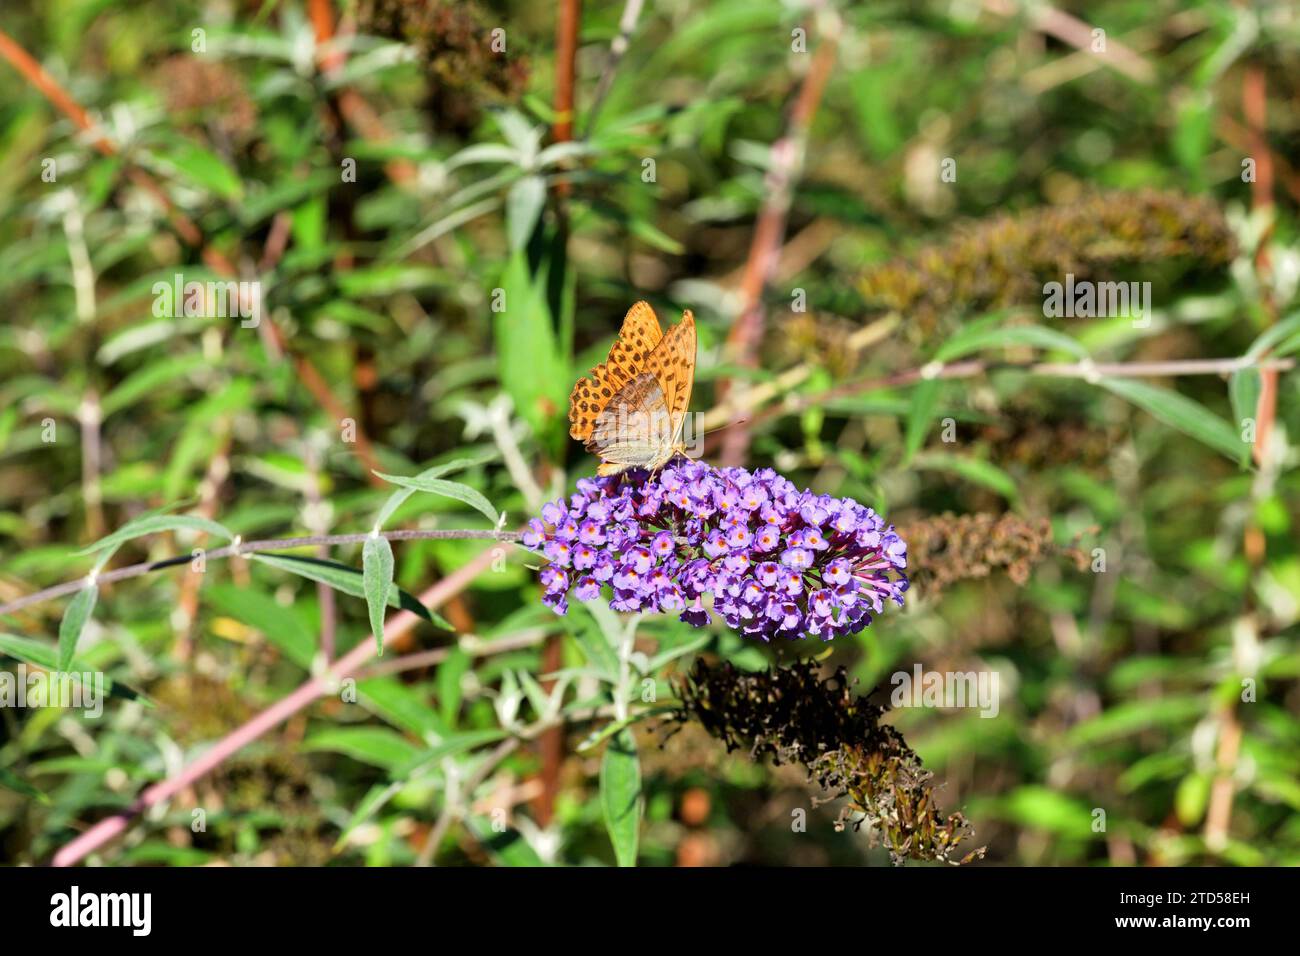 The comma polygonia butterfly fly in meadow full of colorful flowers Stock Photo